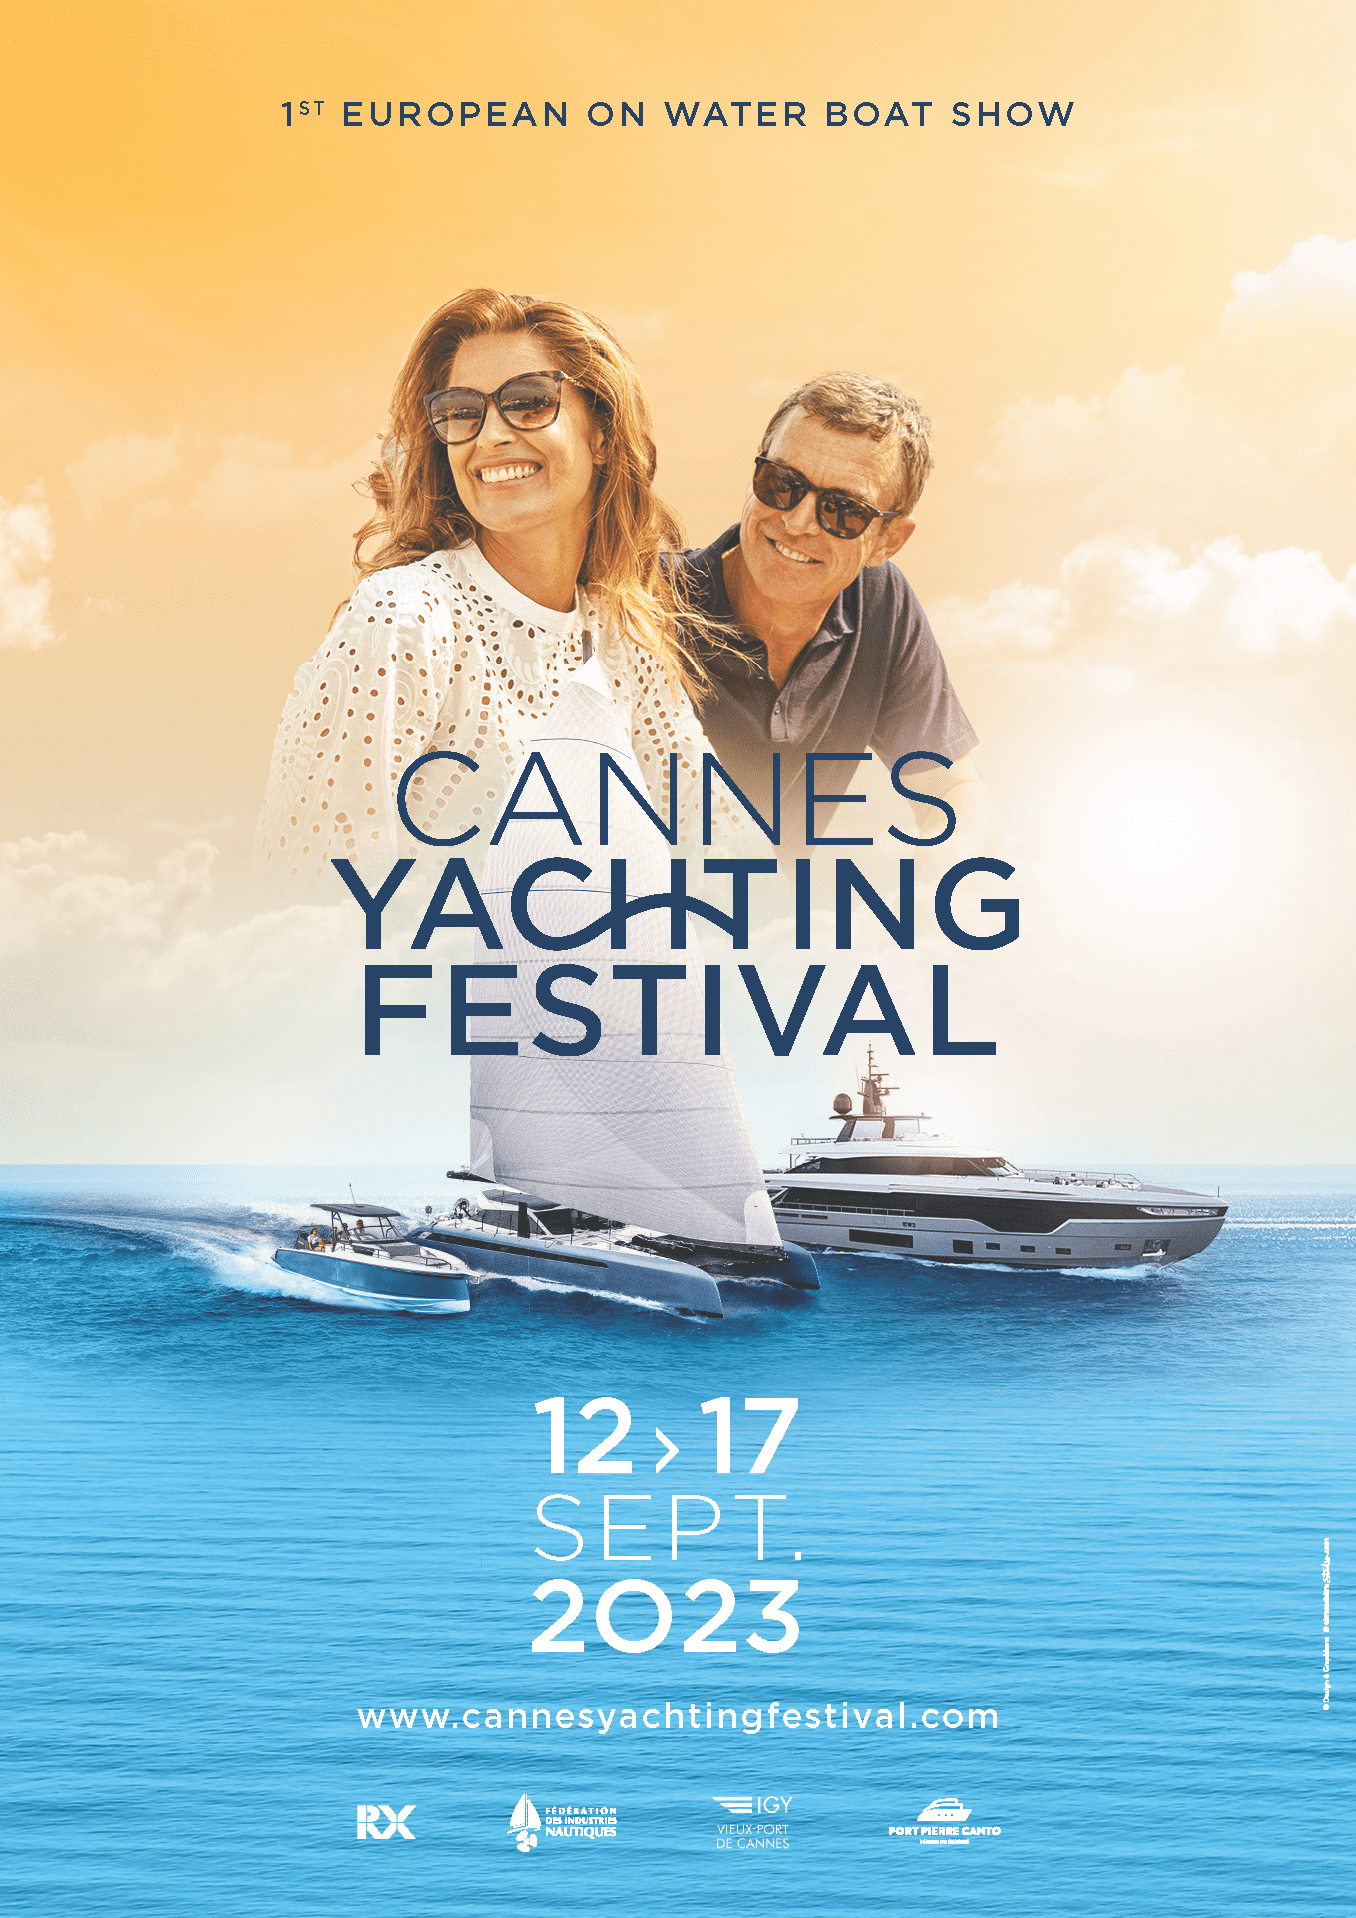 CANNES YACHTING FESTIVAL 2023 - A4 - GB - portrait.png.coredownload.855286042